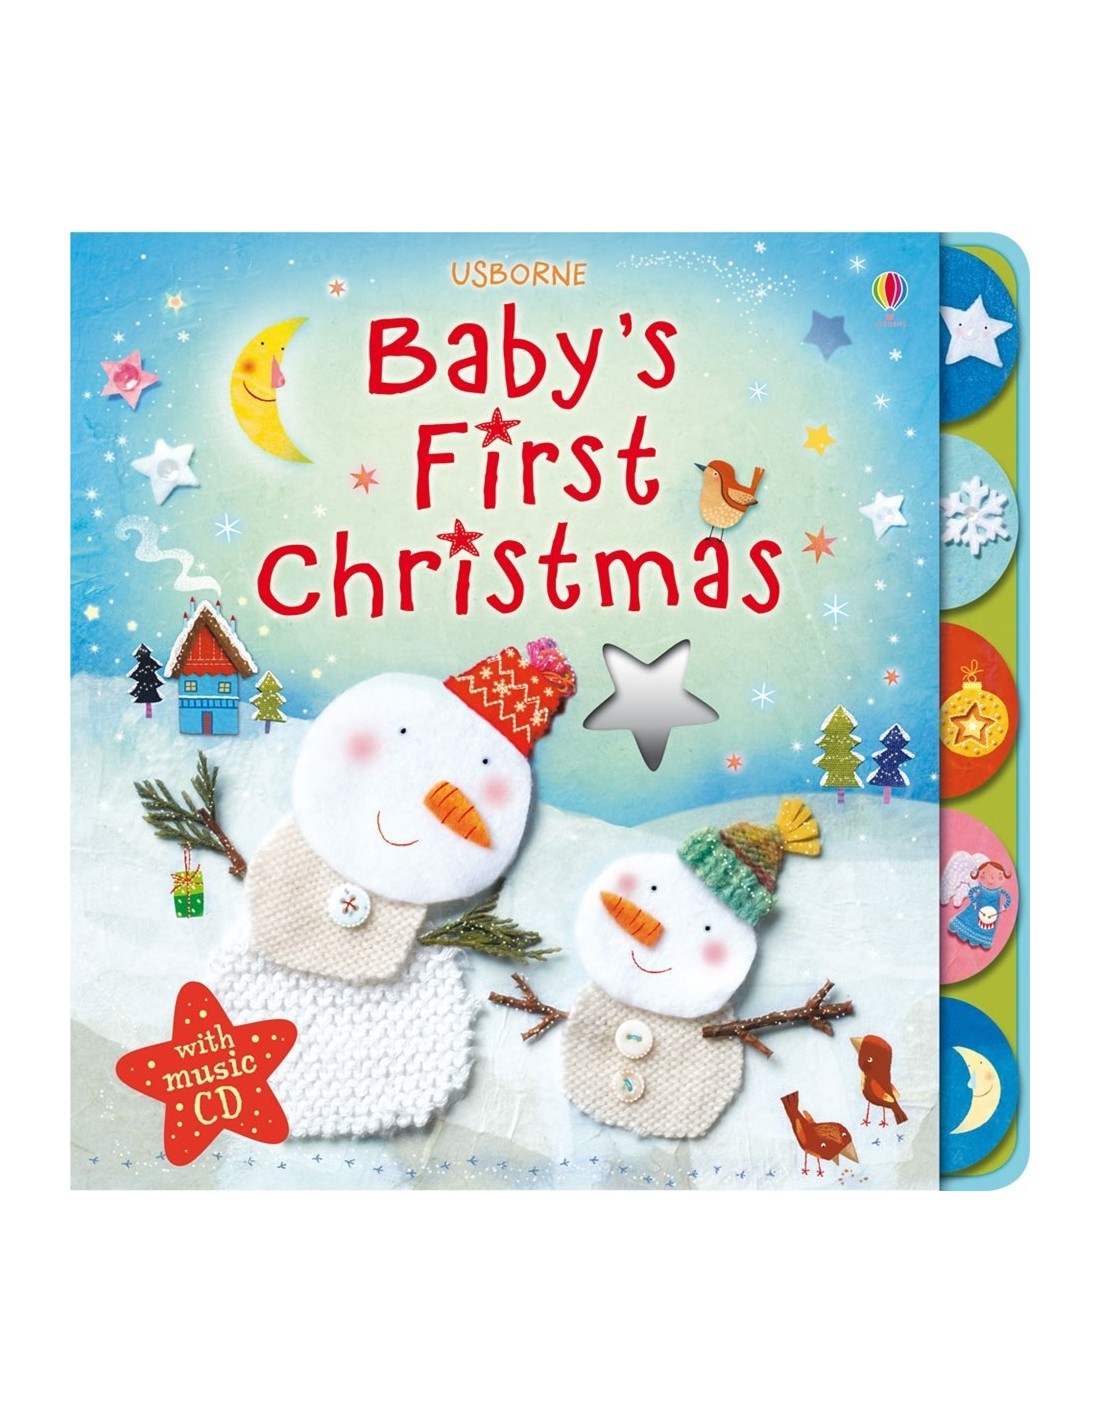 Baby's first Christmas with music CD